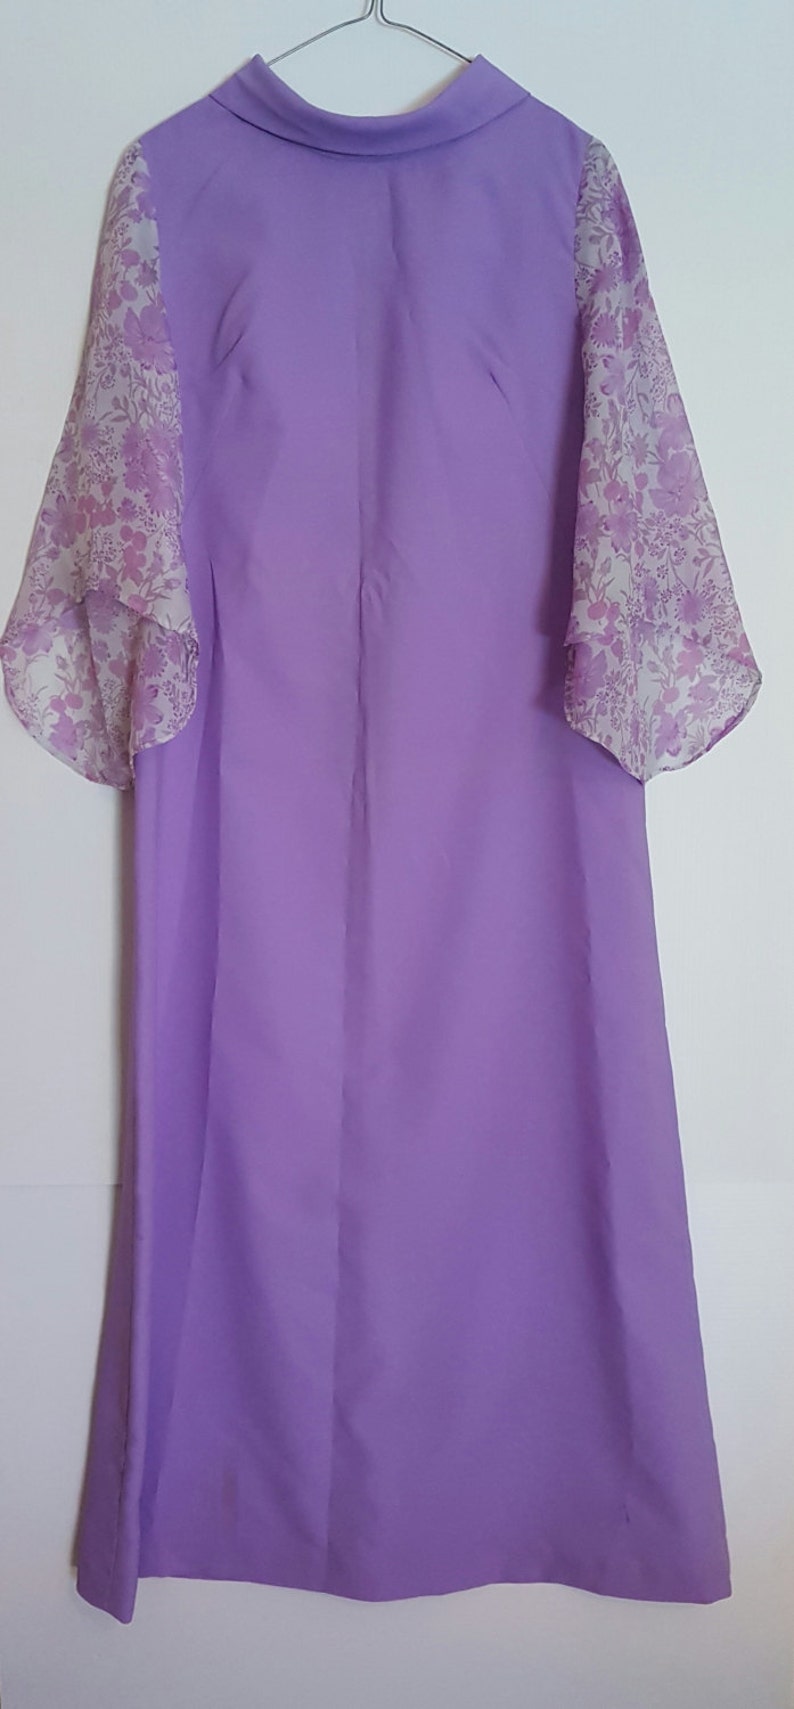 Vintage 1970s lilac purple mauve maxi dress with floral sheer sleeves image 2